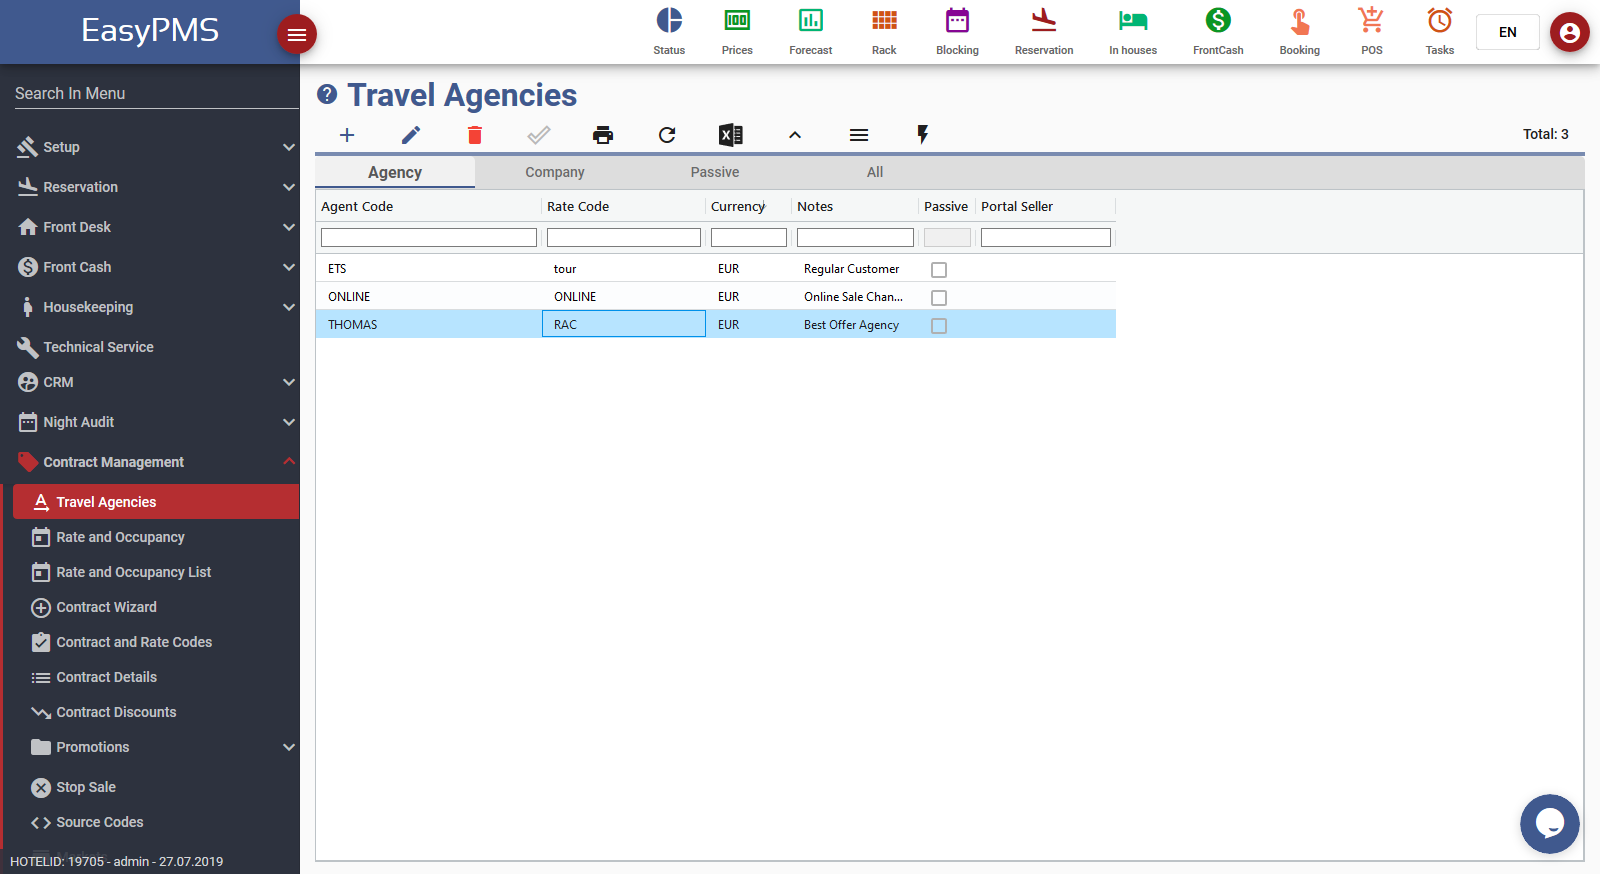 easypms travel agencies contract management